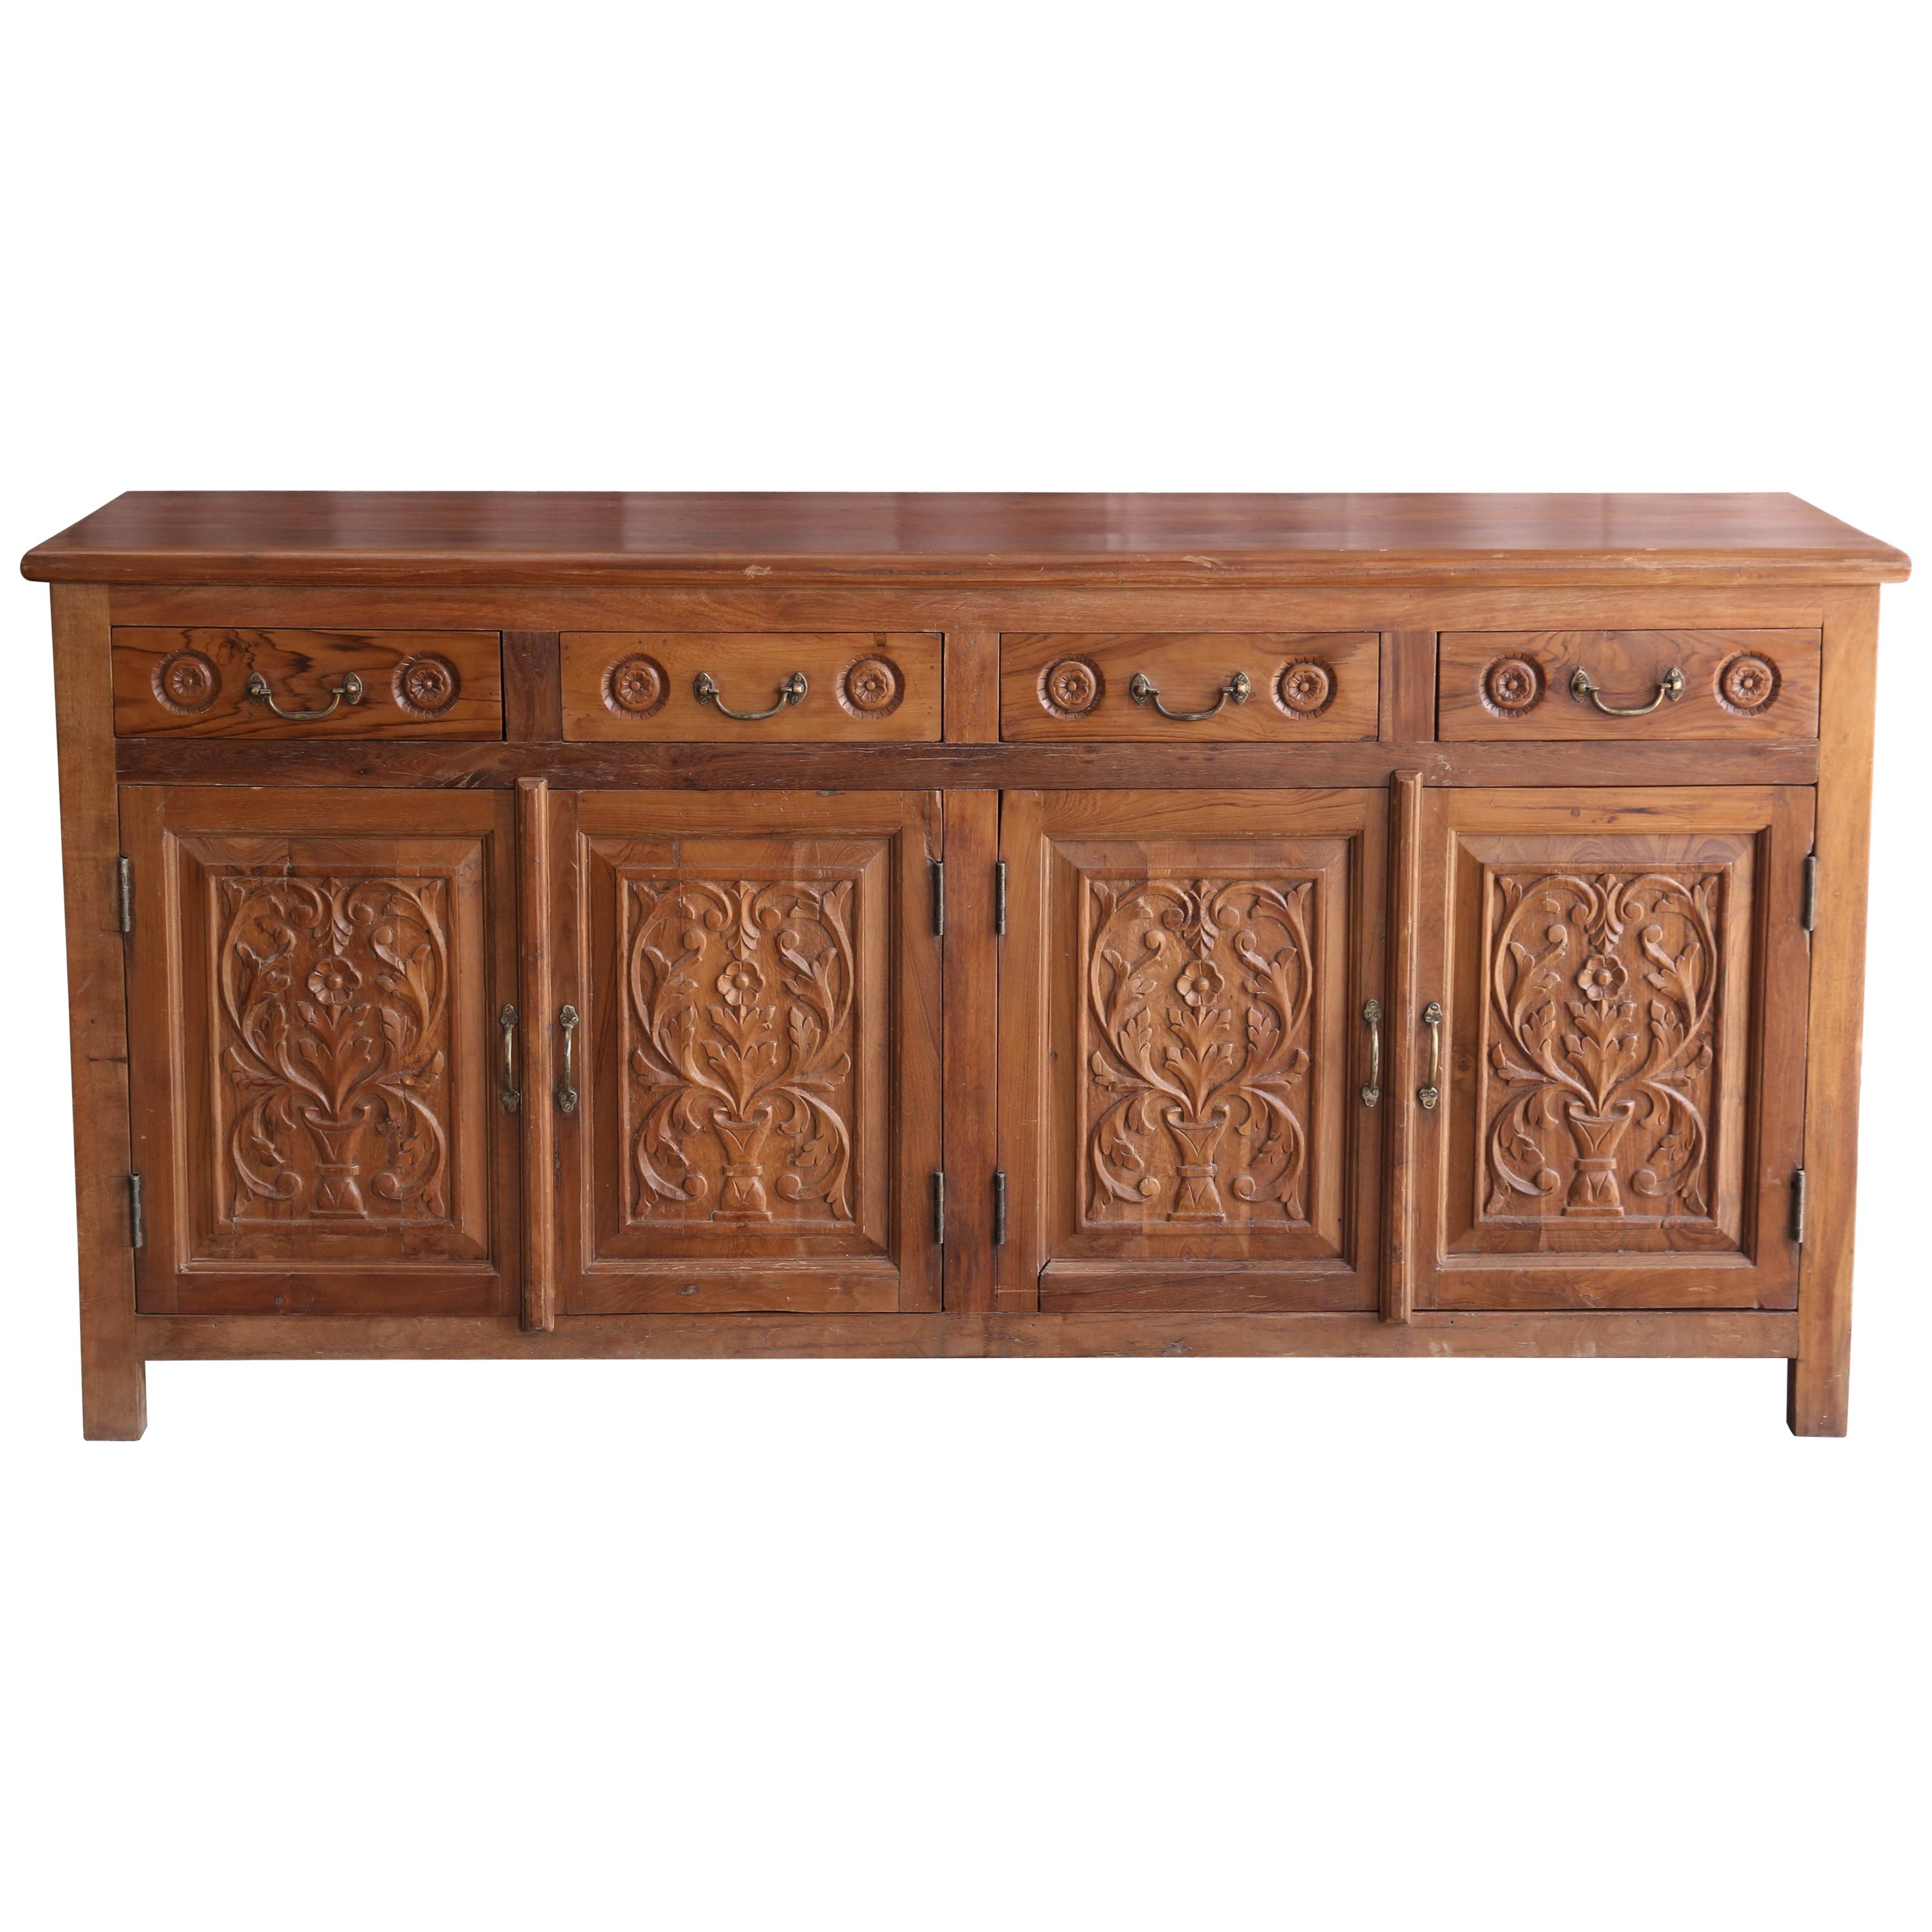 Solid Teak Wood Early 20th Century Entry Hall Credenza from a Tea Plantation